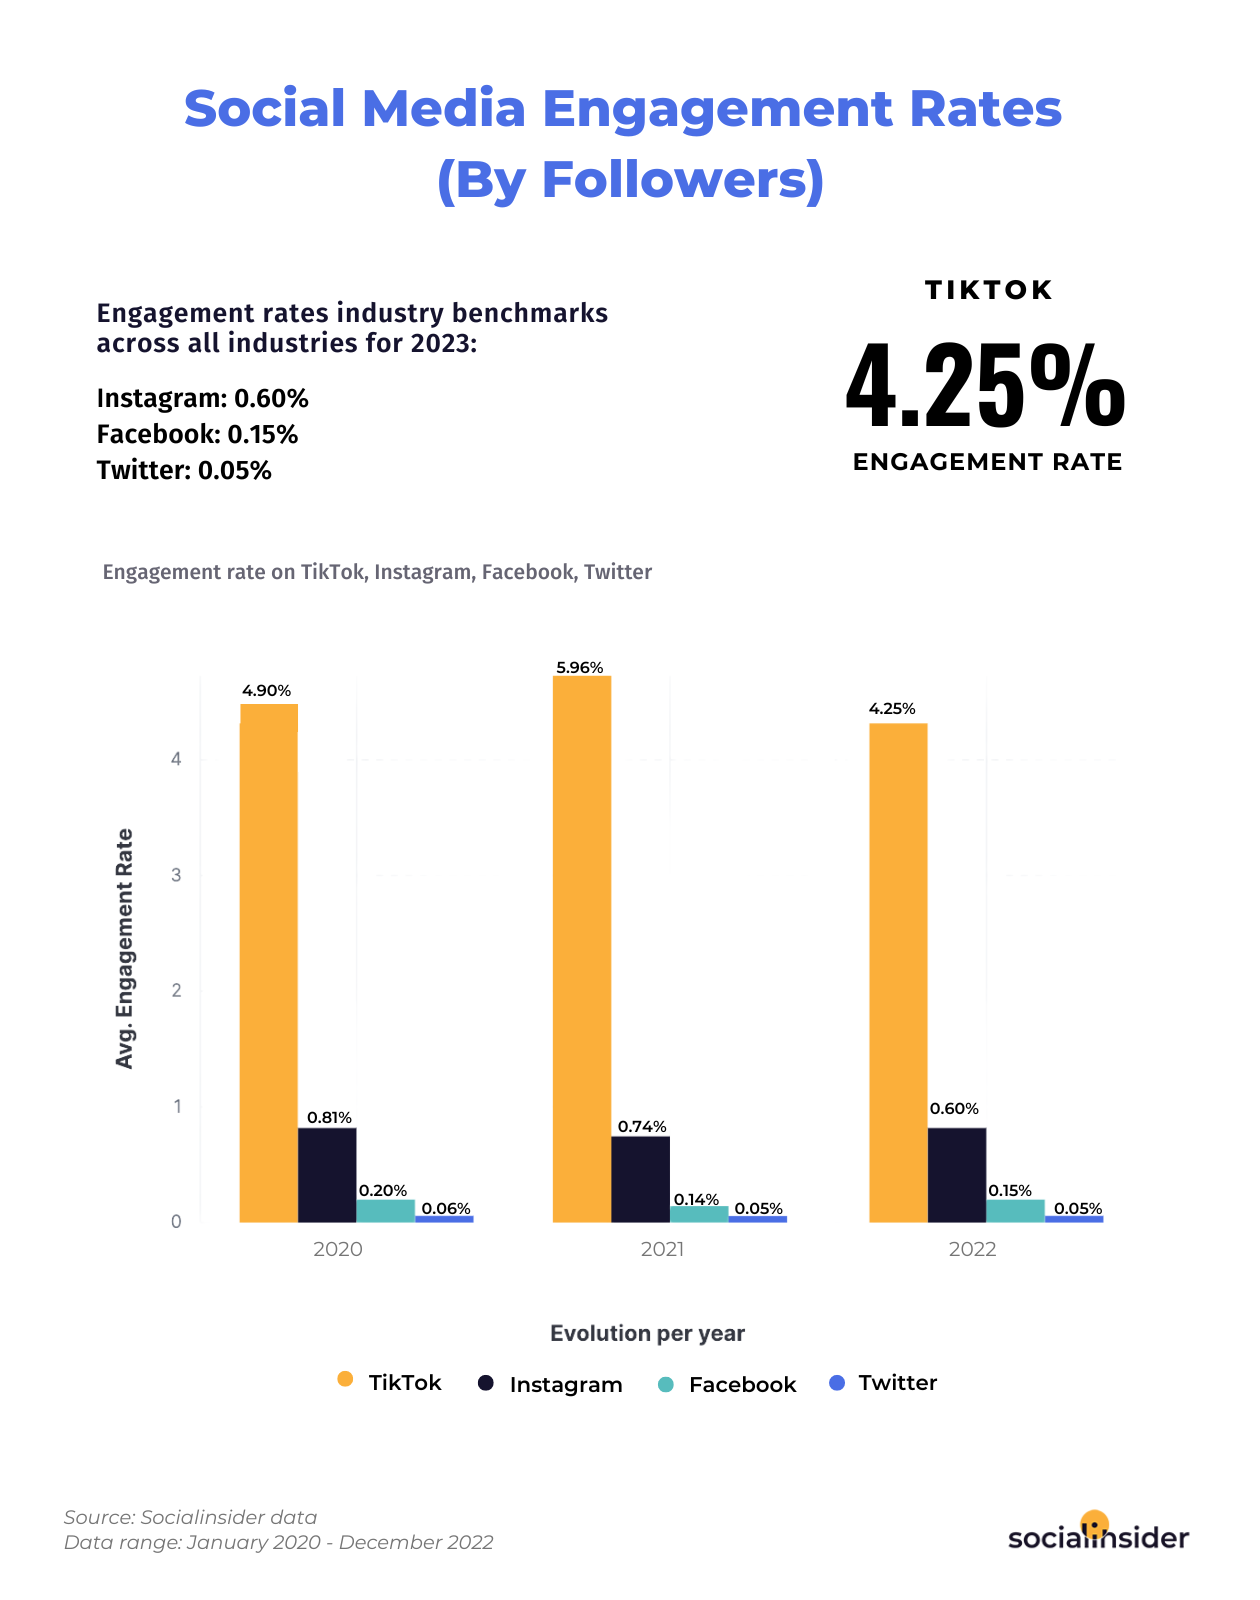 Social media engagement rates by followers